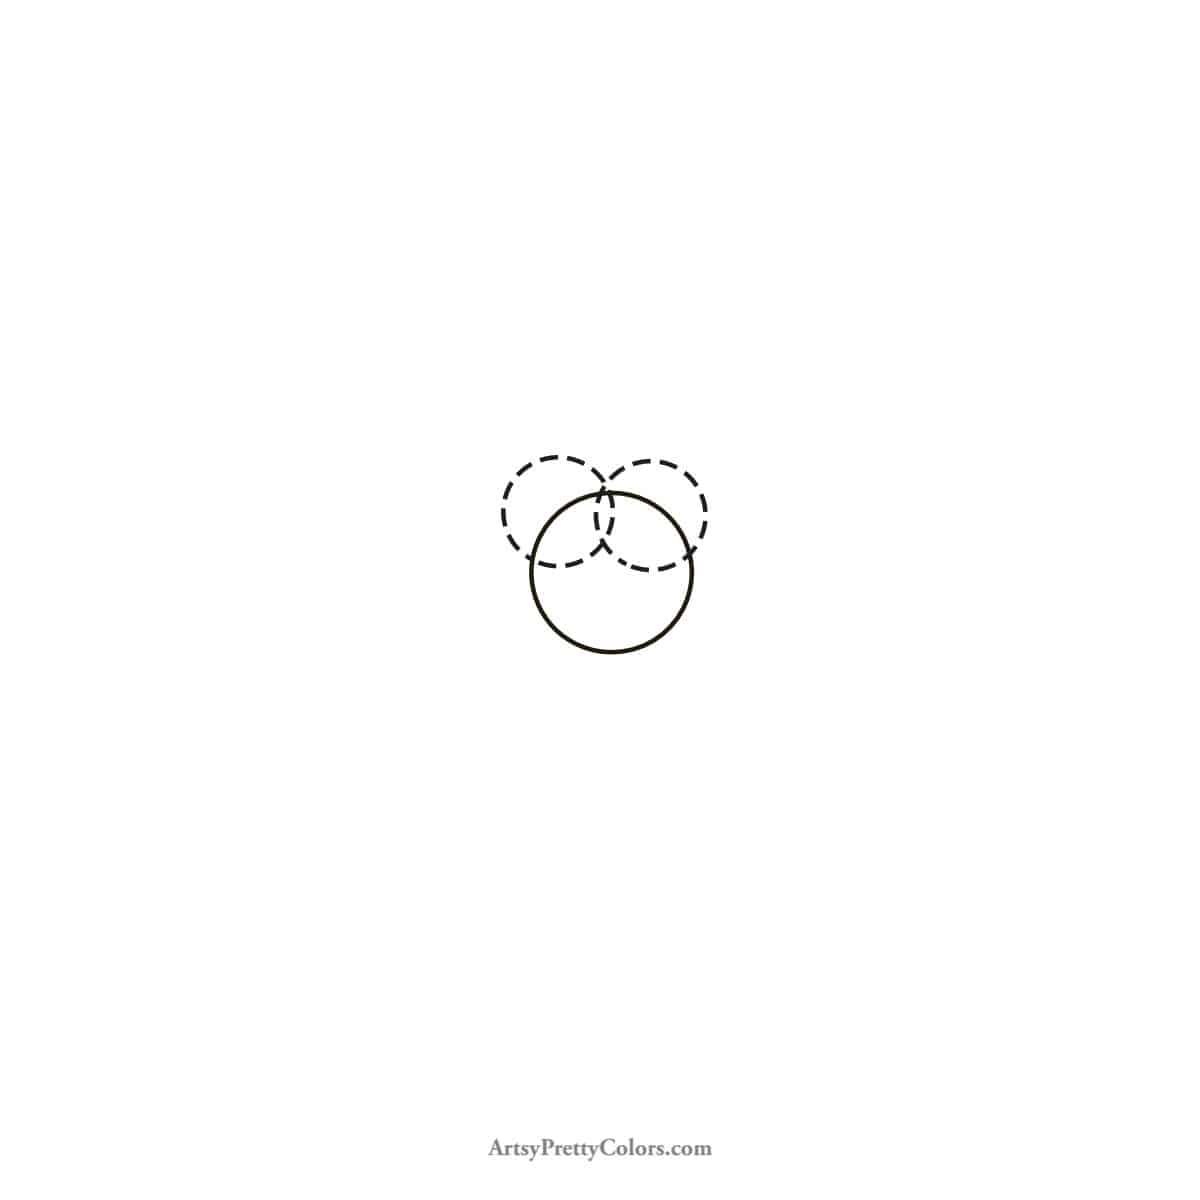 two circles dotted marking position of the eyes